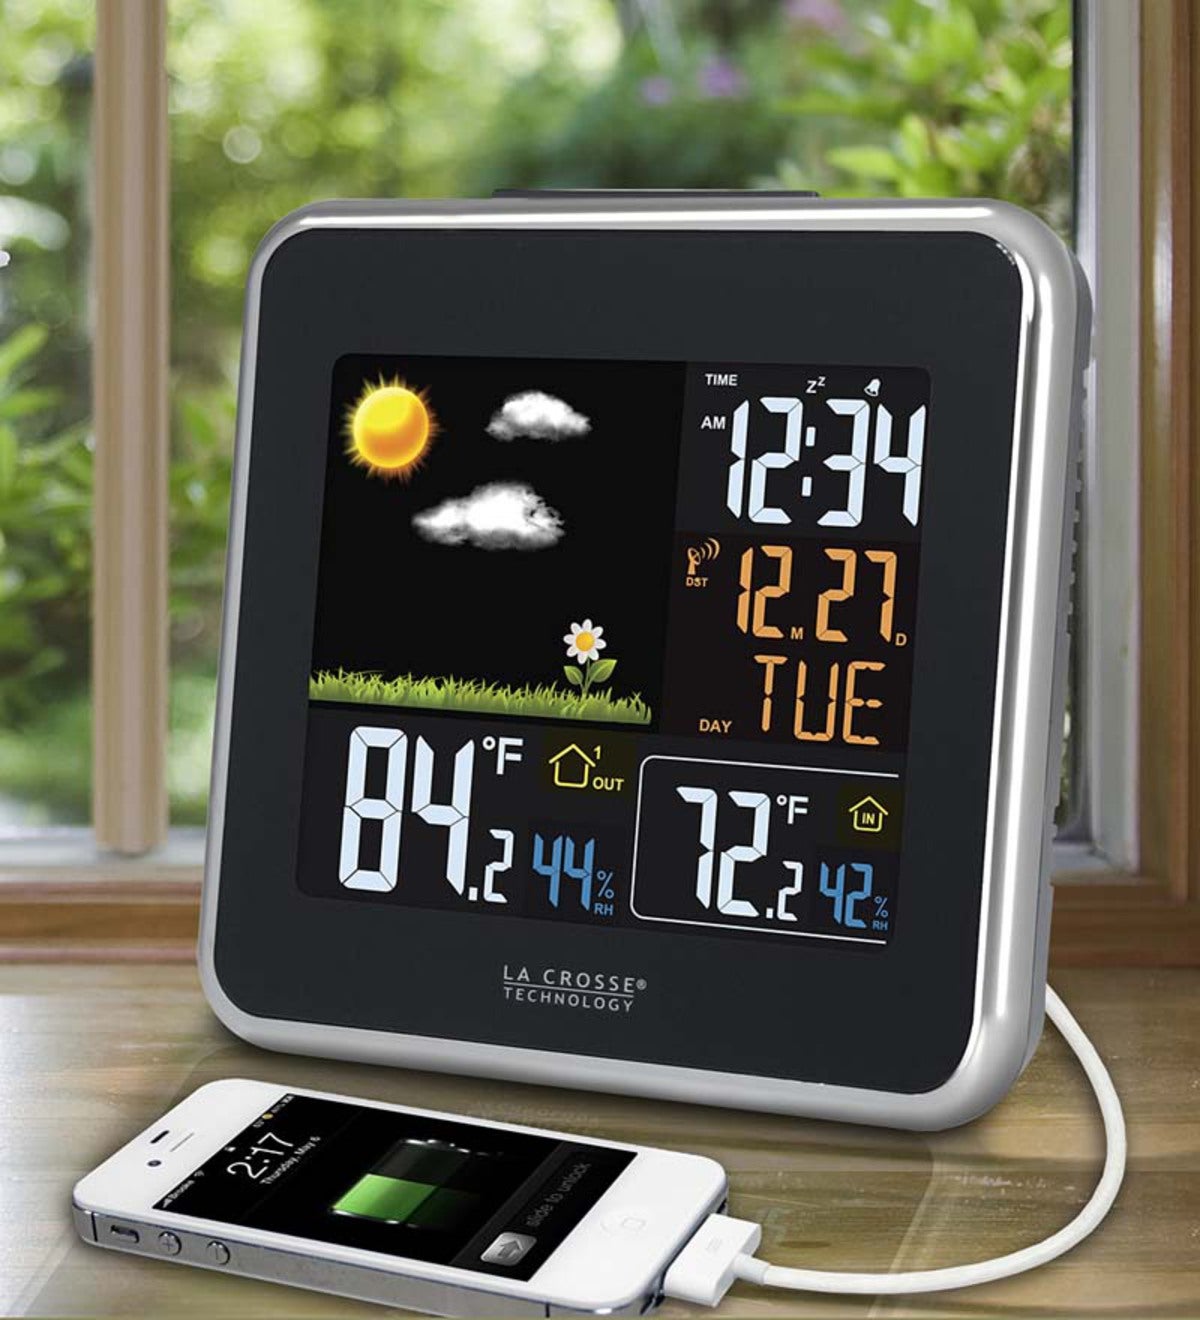 New ! La Crosse Technology Wireless Weather Station with Atomic Time & Date